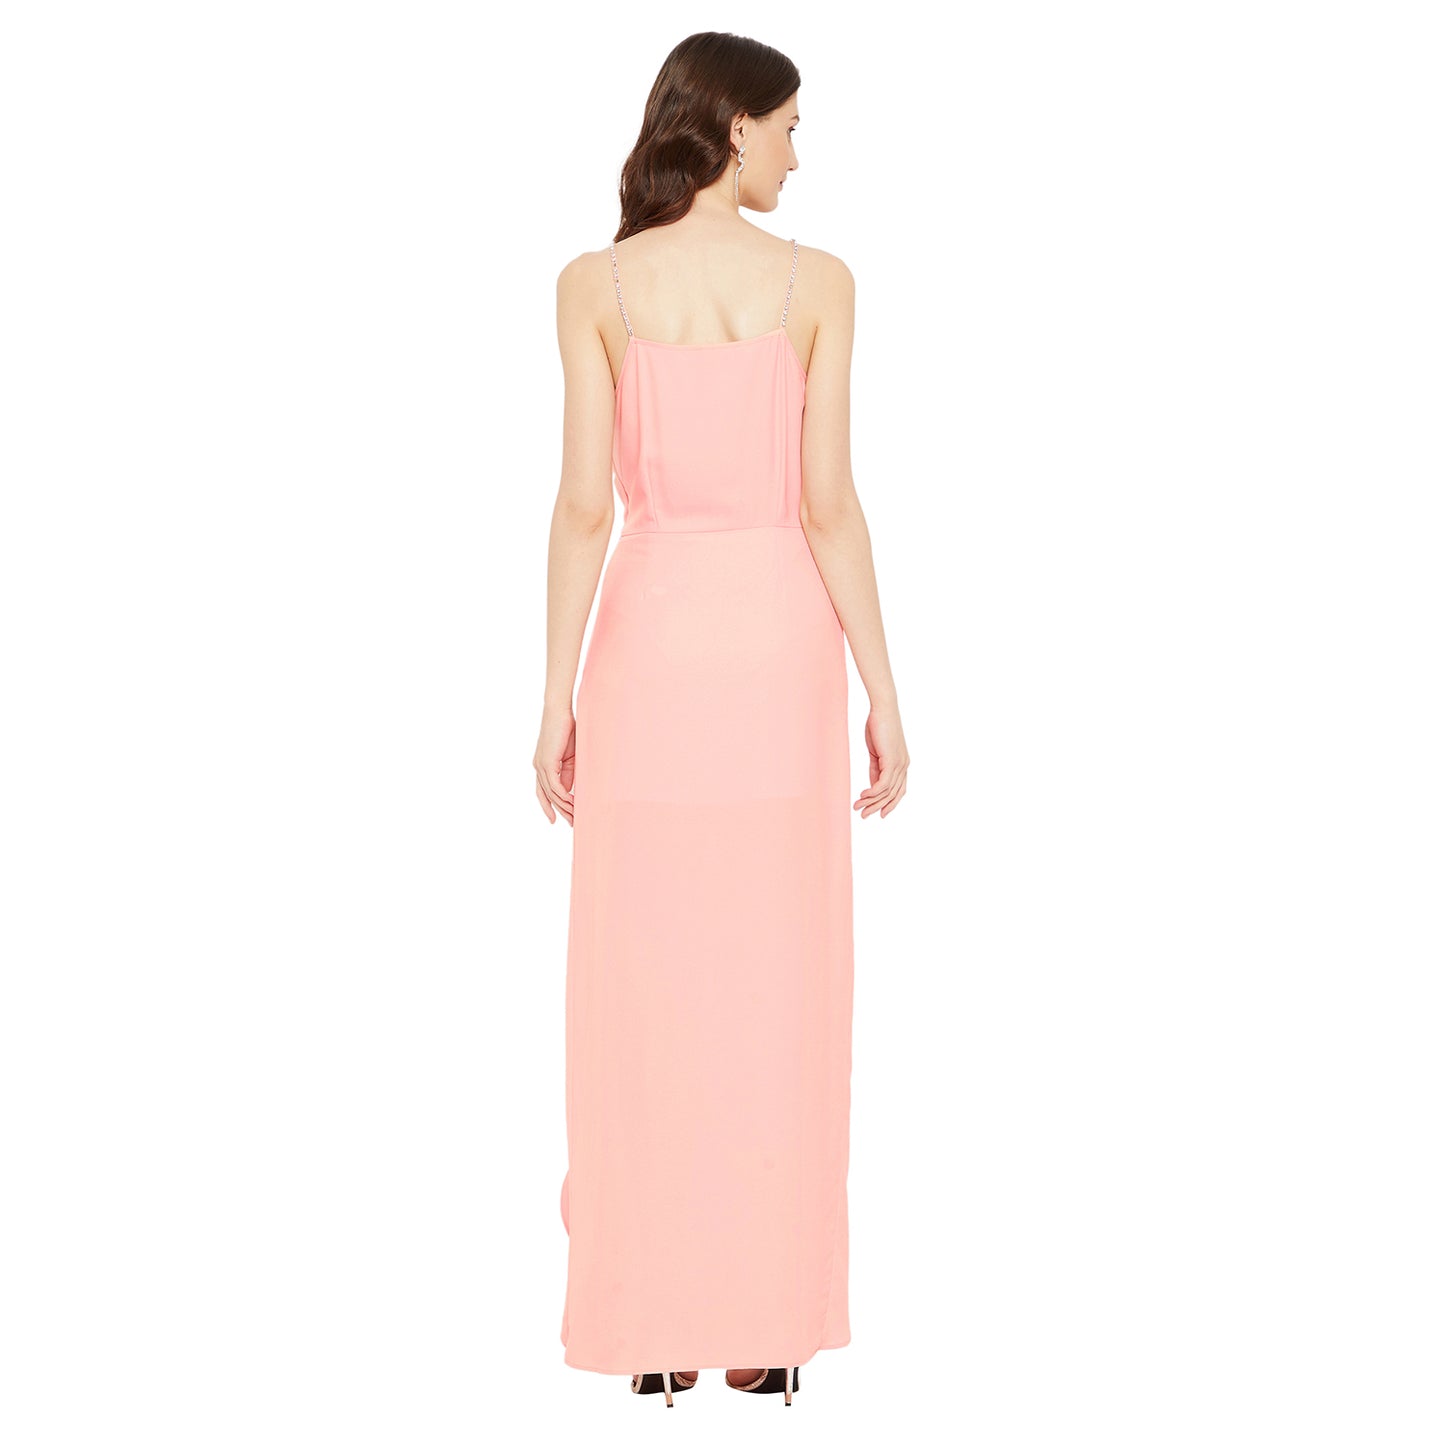 LY2 Peach Overlap Dress With Side Slit